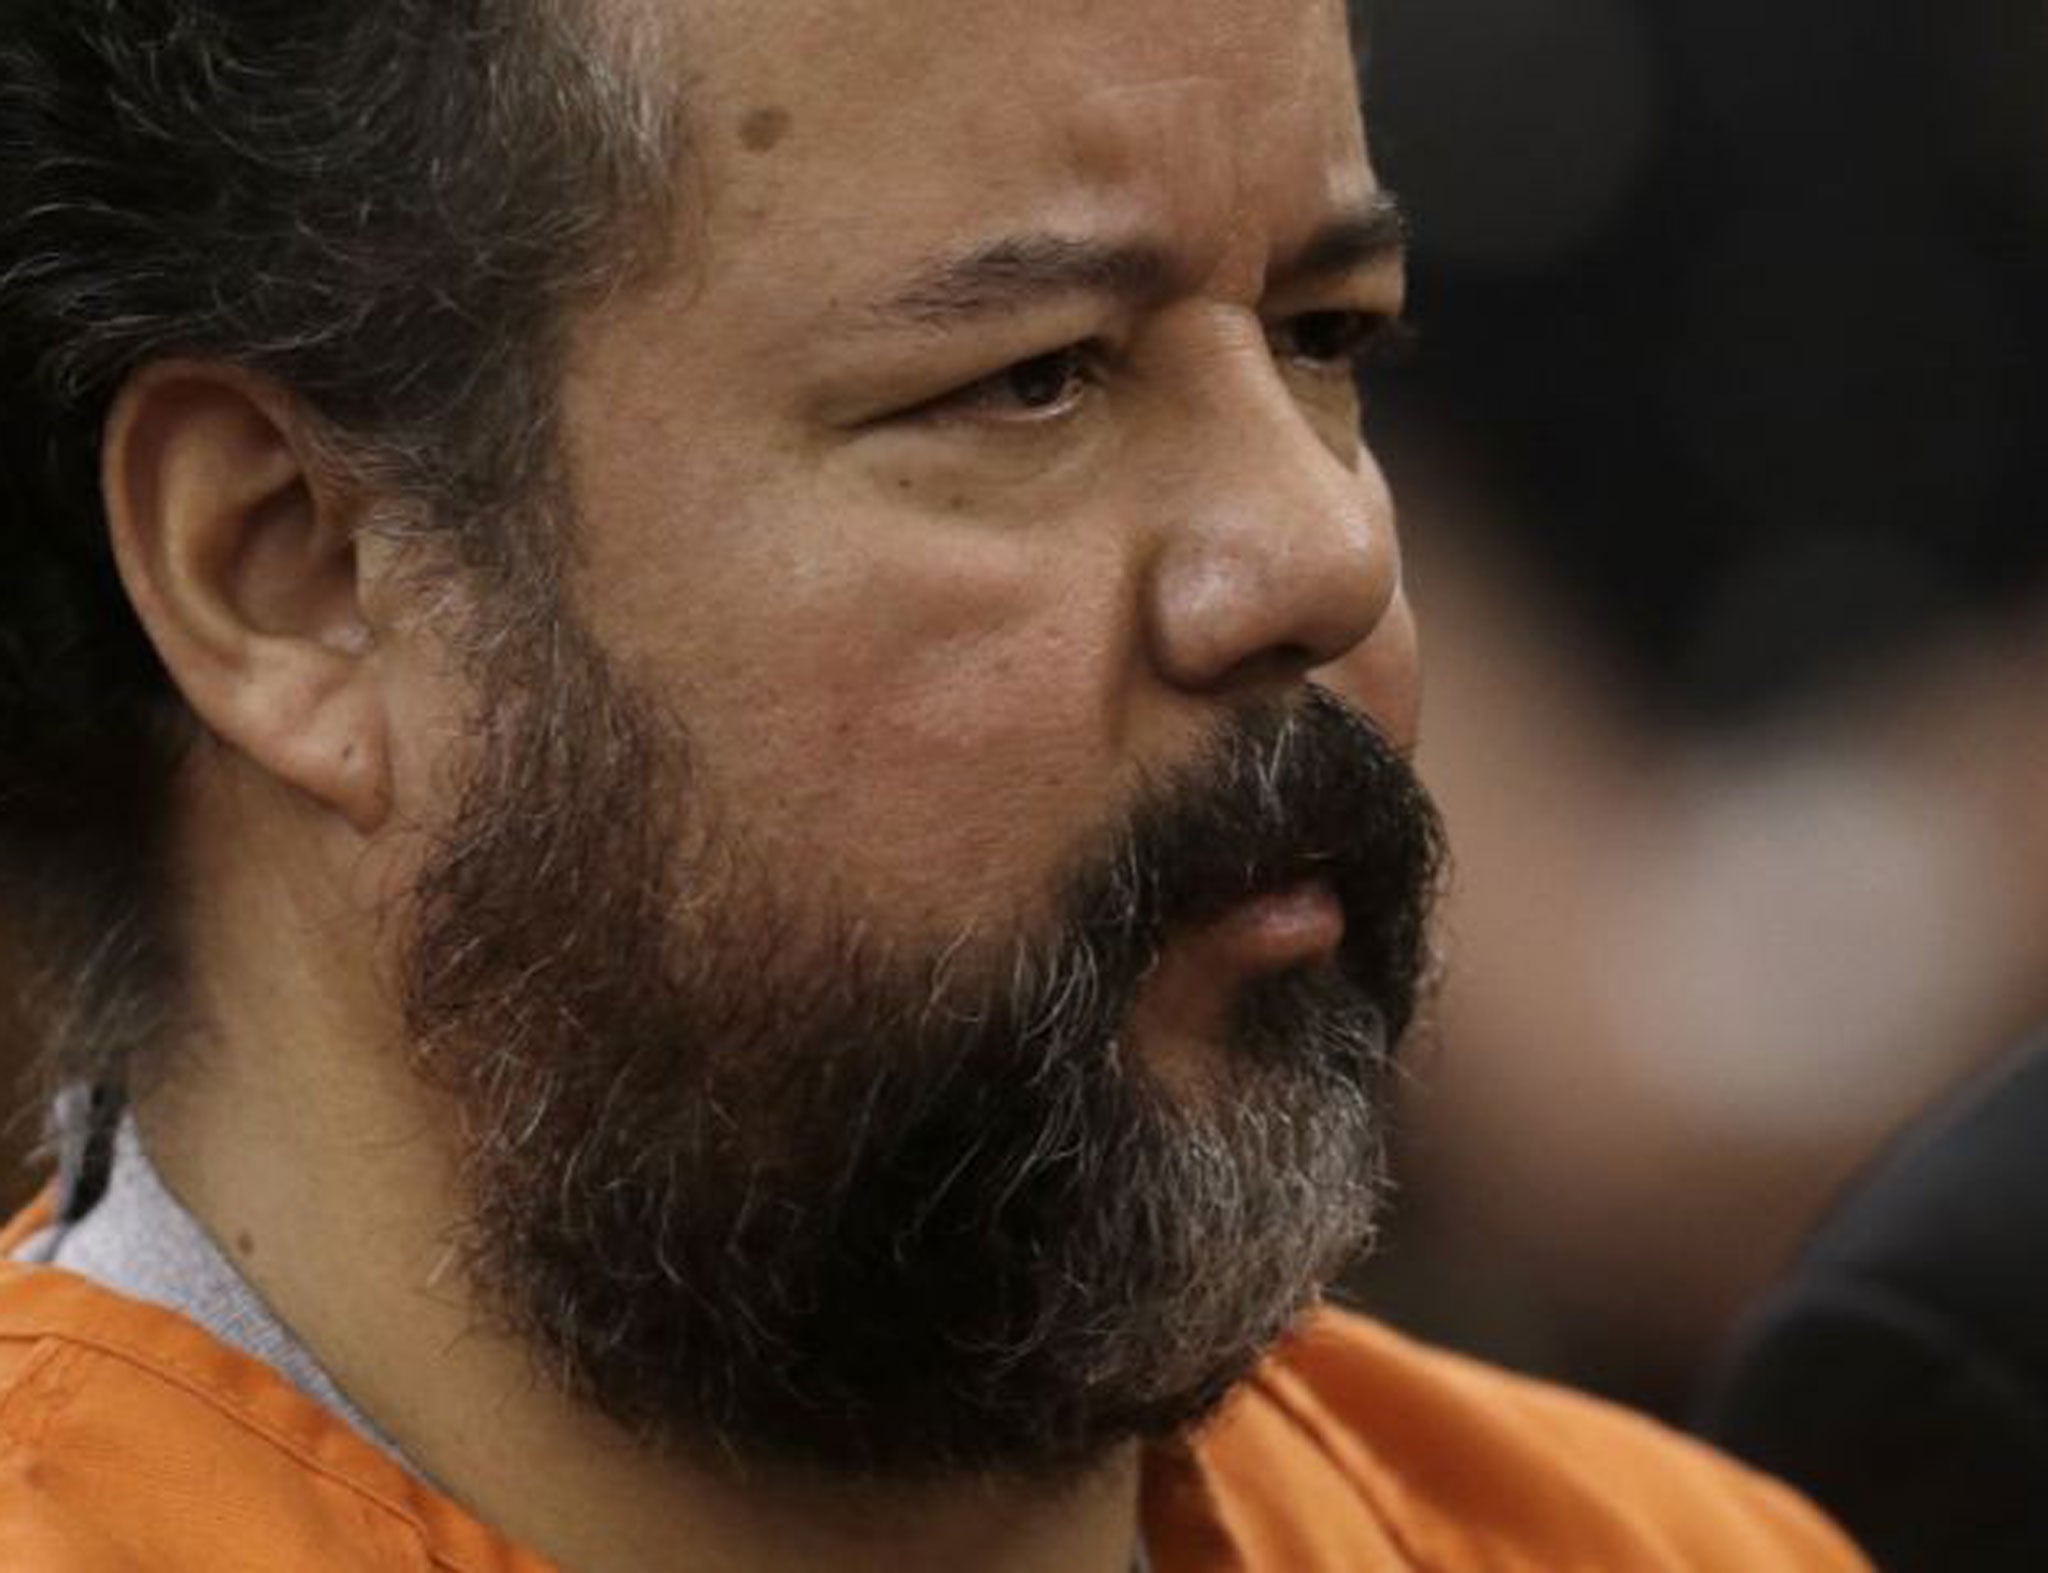 Castro was sentenced to life in prison plus 1,000 years last month